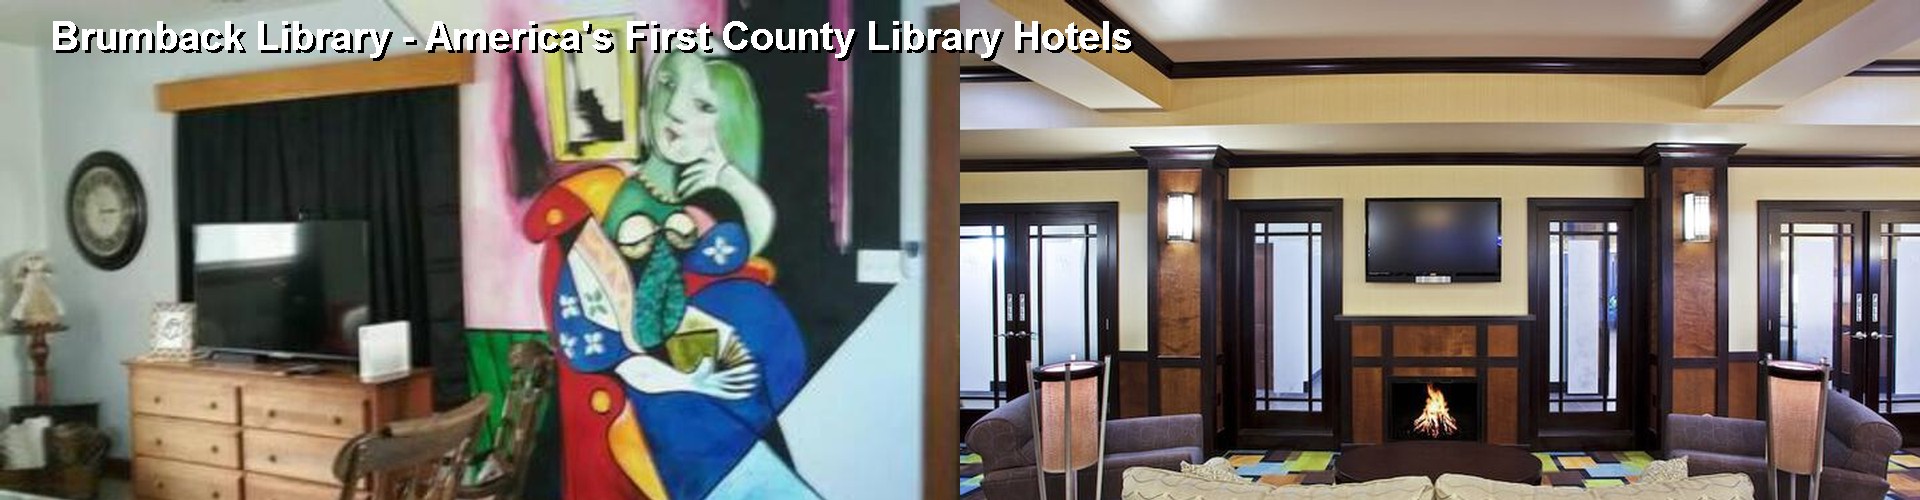 5 Best Hotels near Brumback Library - America's First County Library